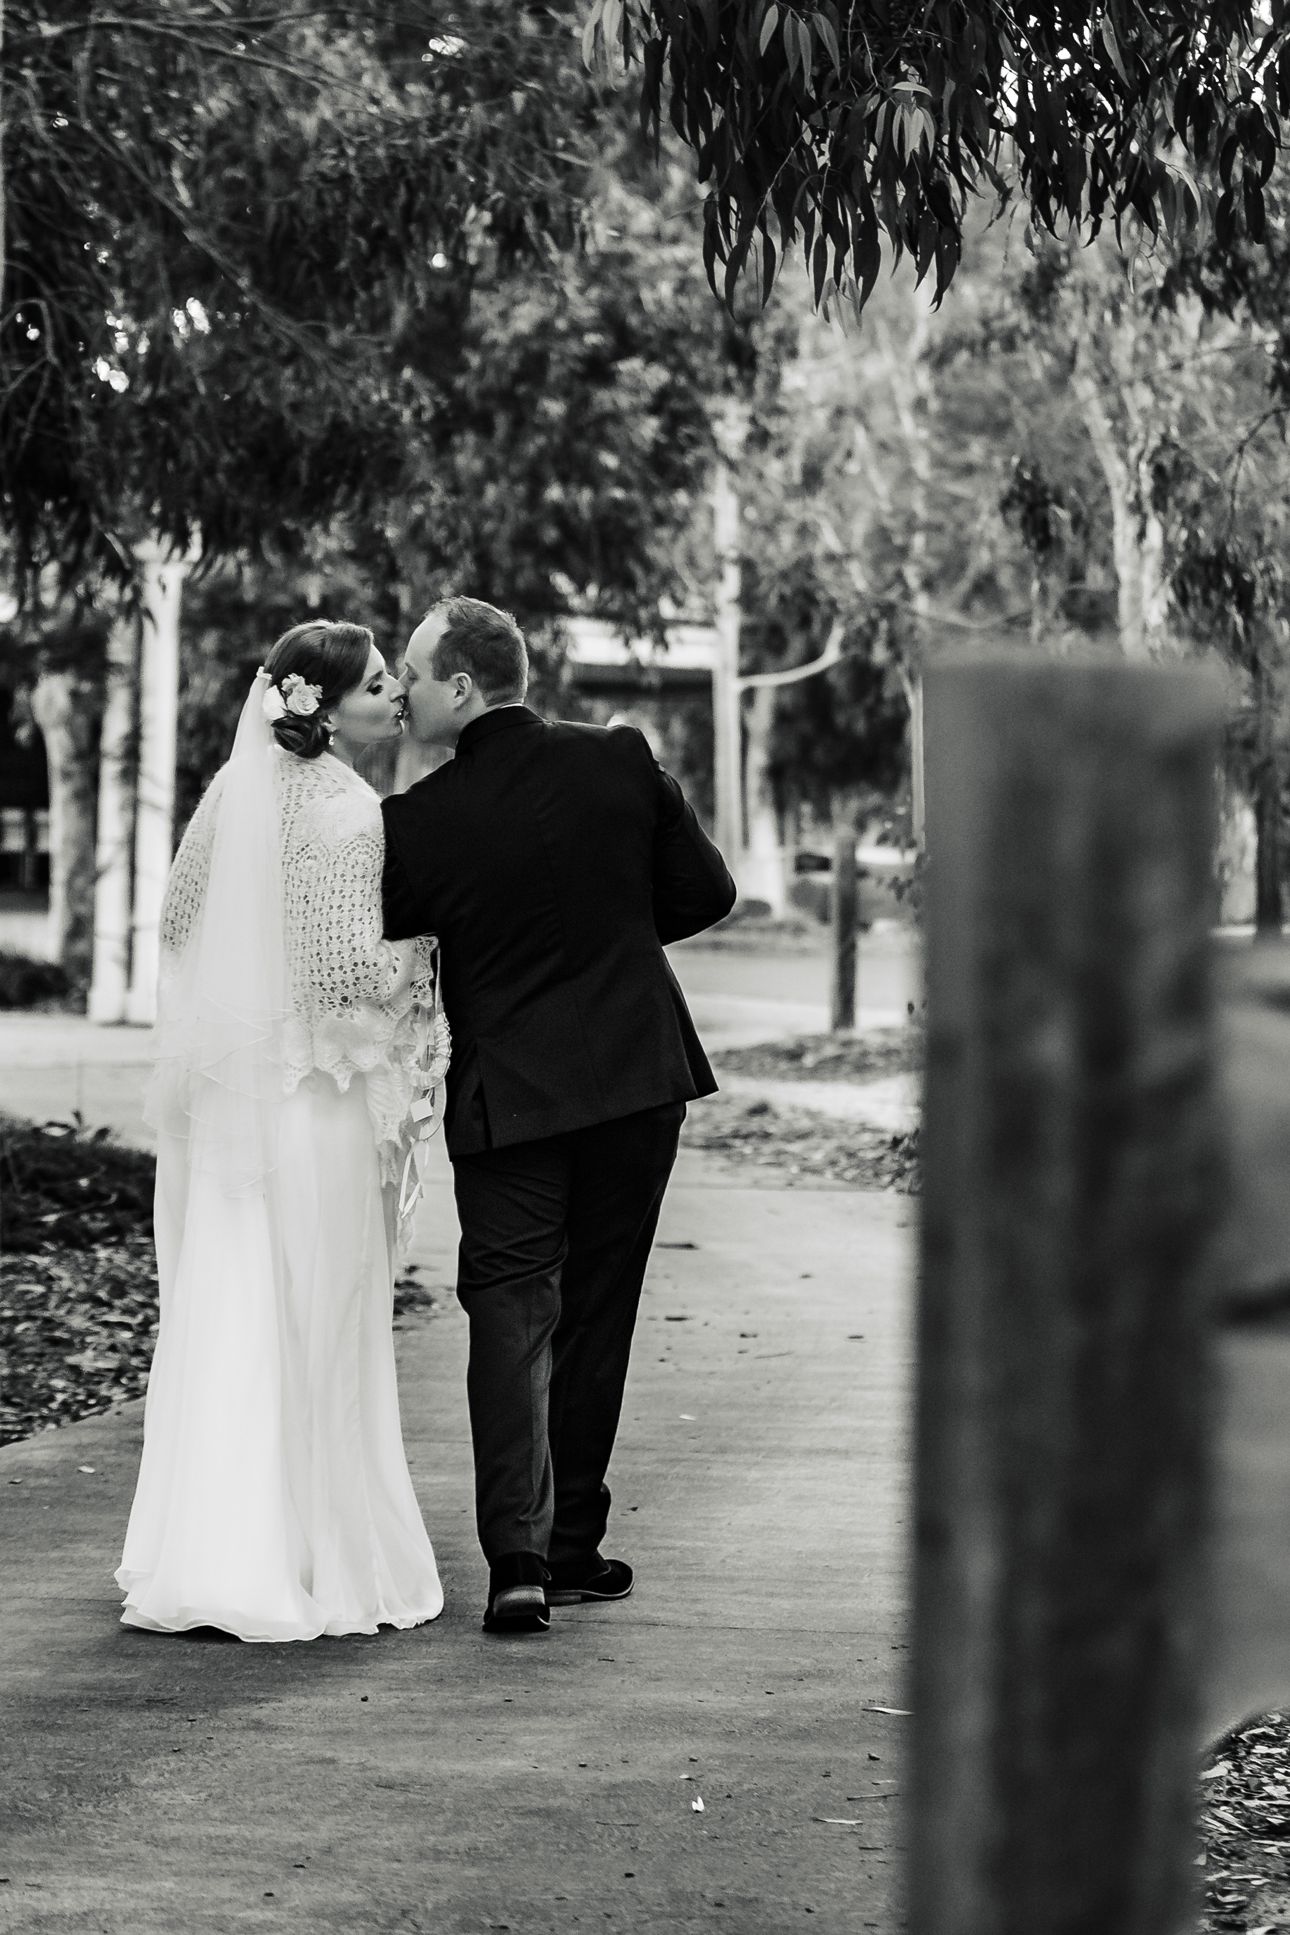 Celebrate your love story at Eynesbury Homestead: A historic venue for an intimate or grand Melbourne wedding